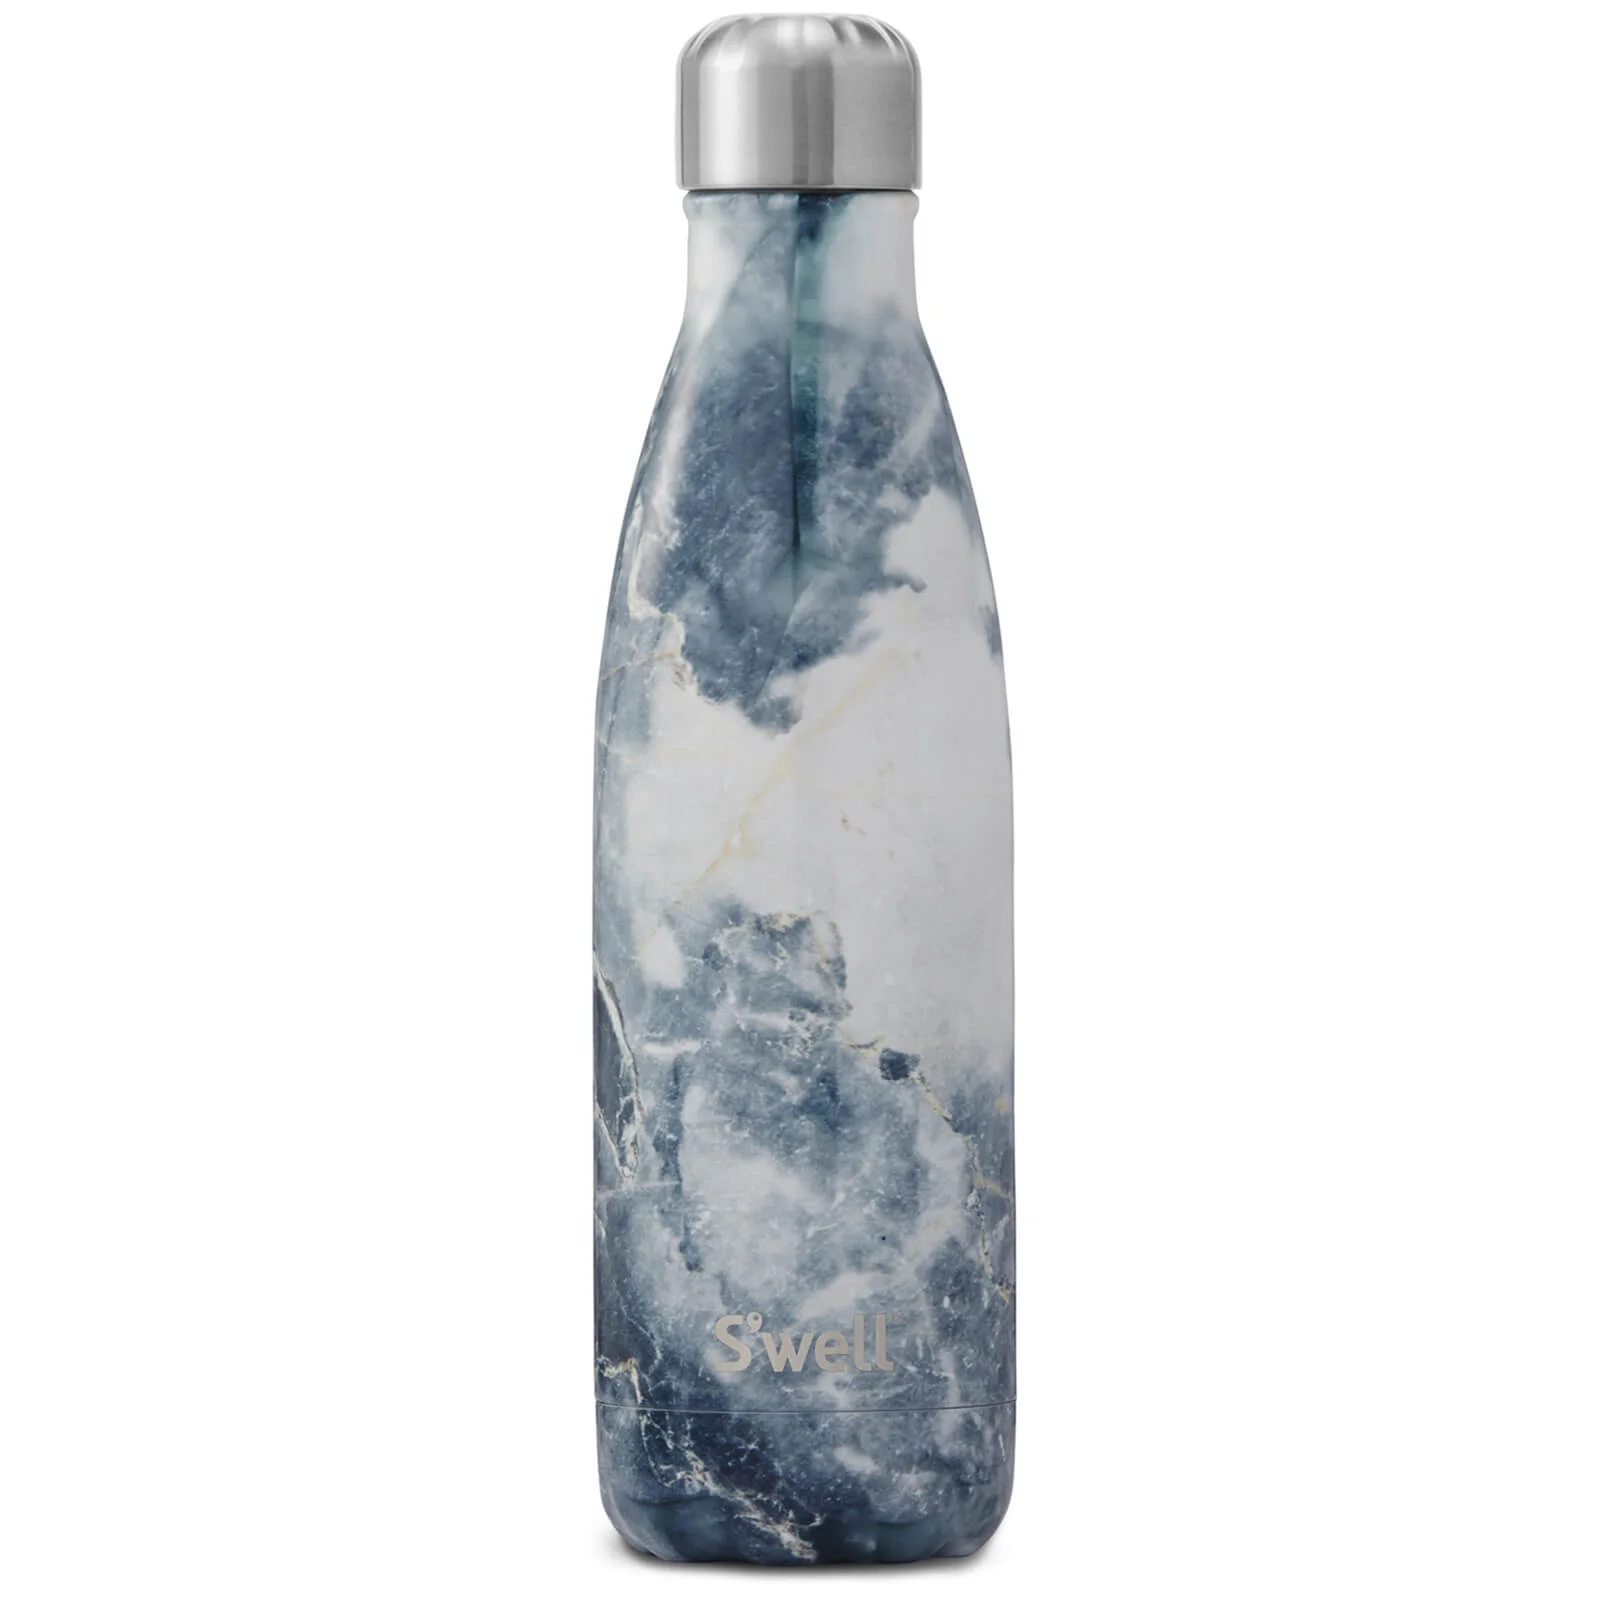 S'well The Blue Granite Water Bottle 500ml Image 1